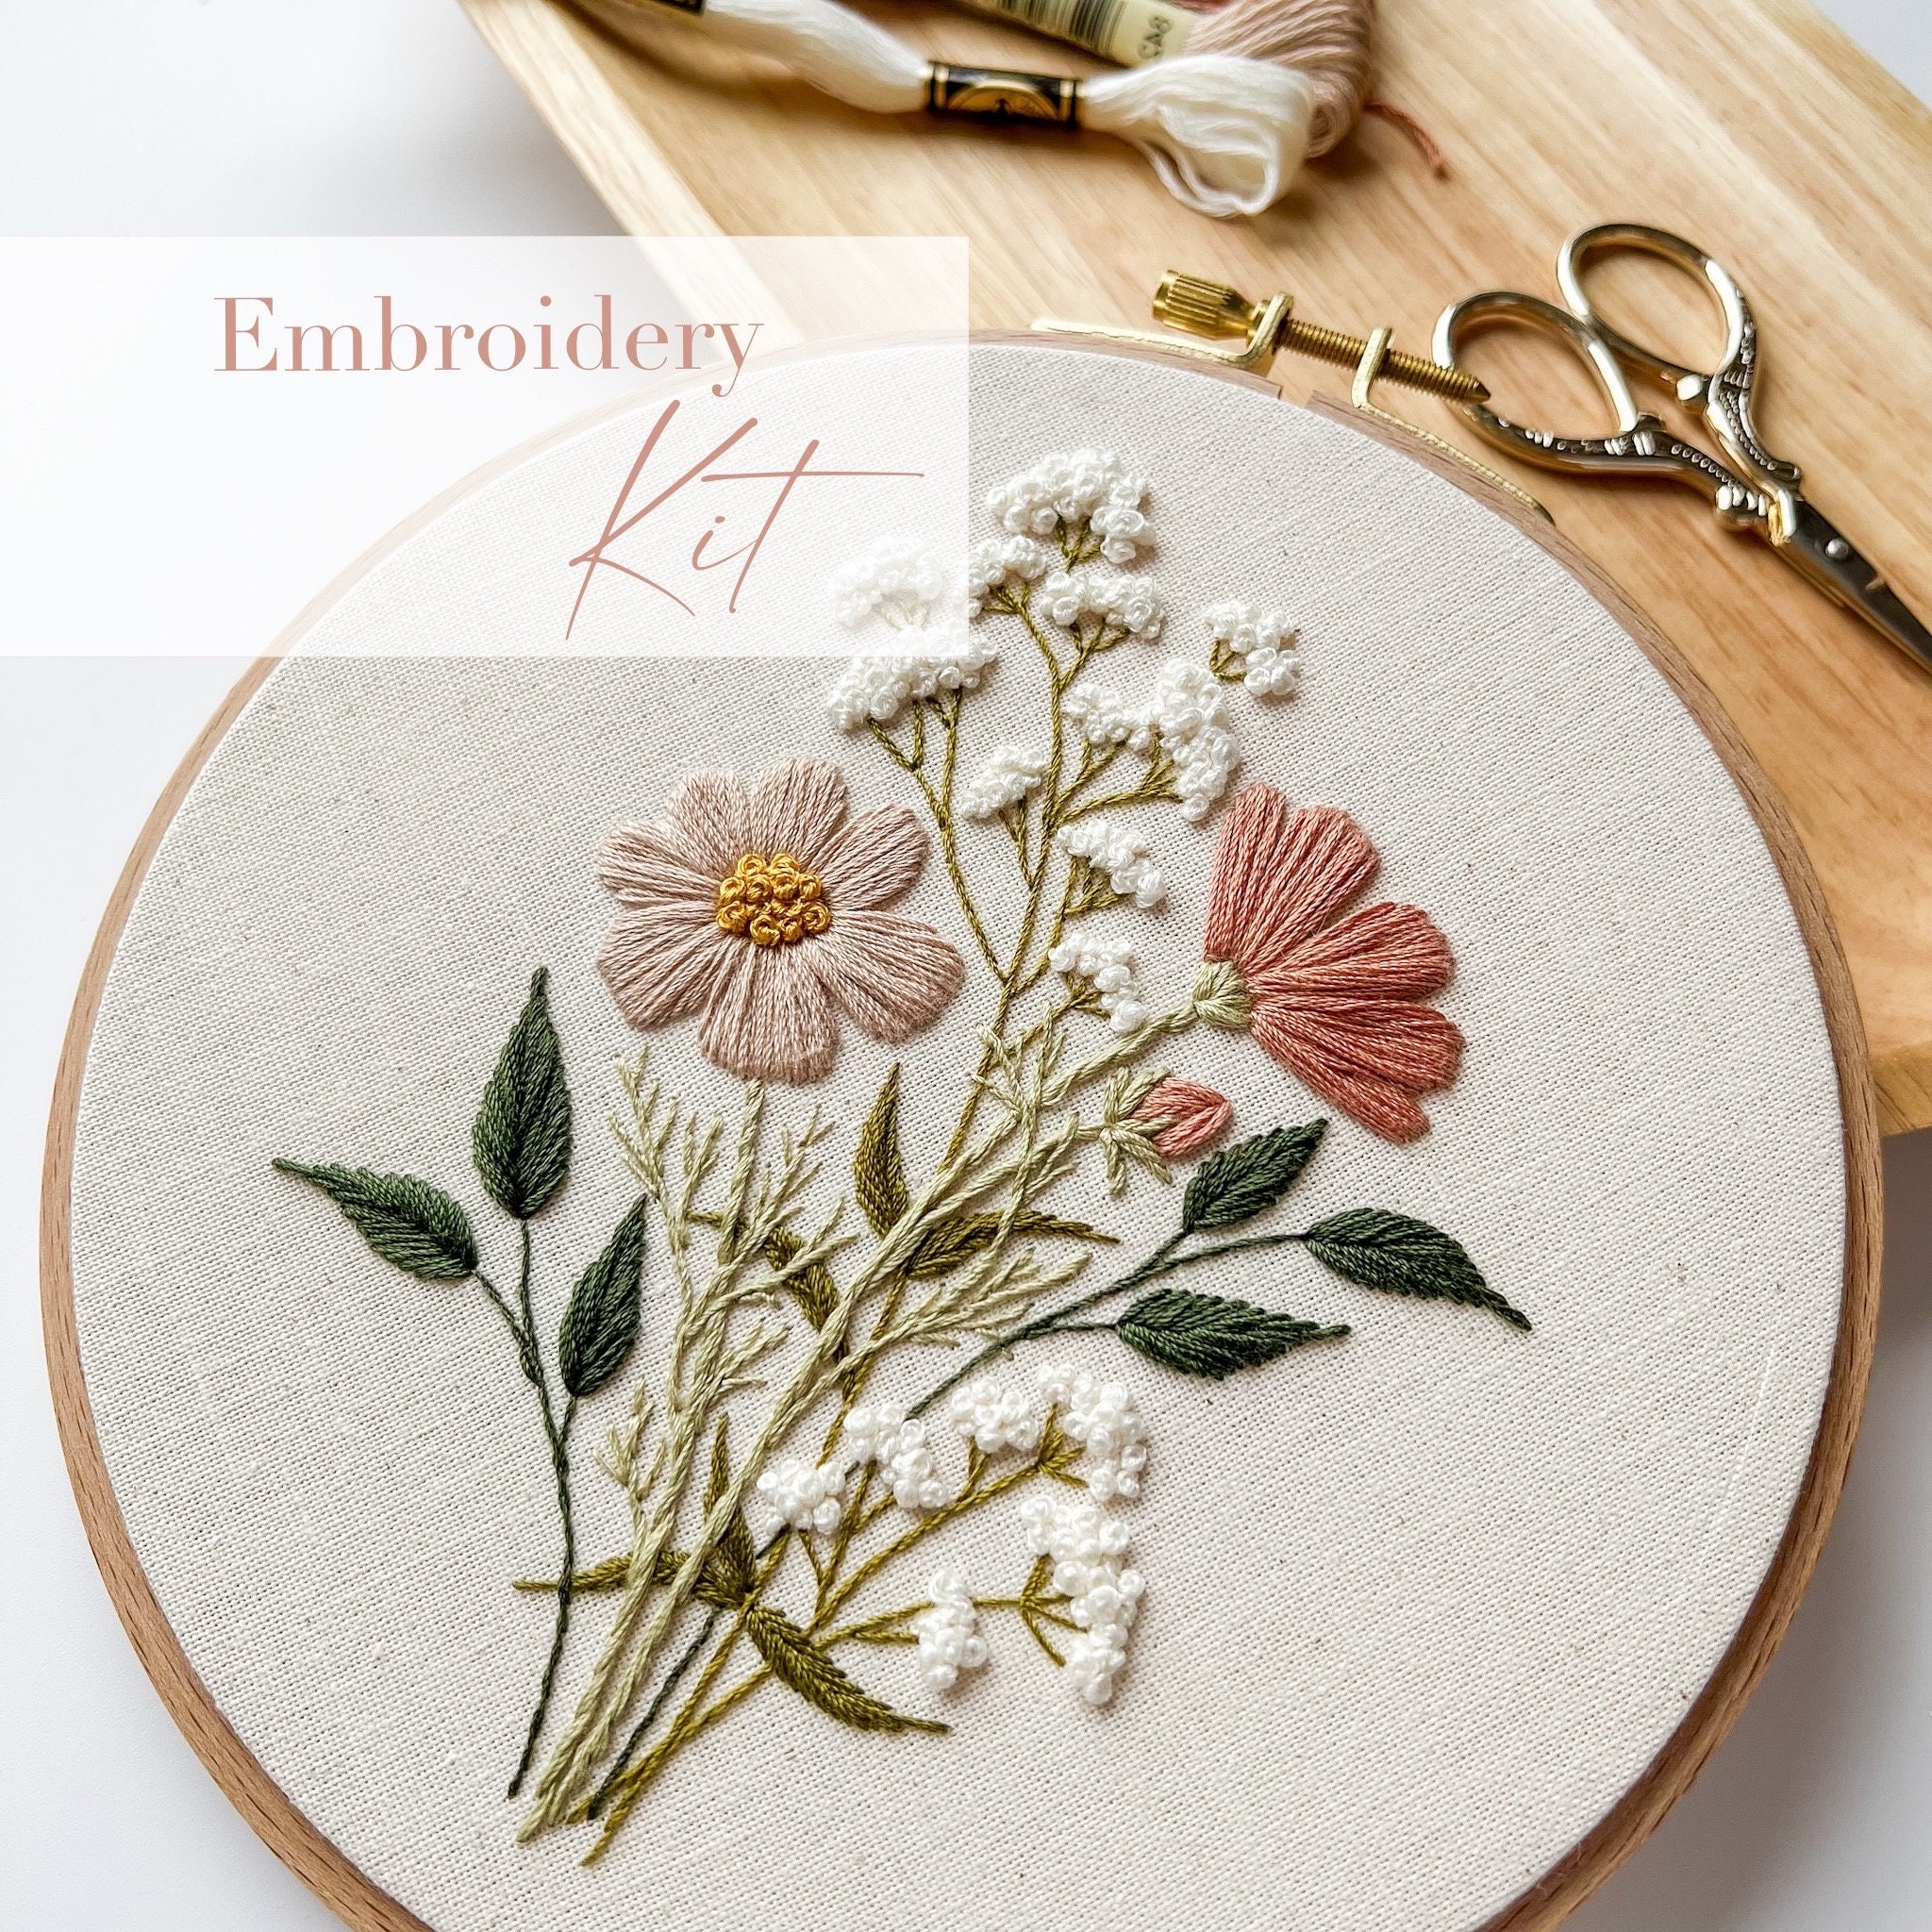 Wildflower Kit, Hand Embroidery Kit, DIY Embroidery, Flower Embroidery Kit,  Beginner Level, Embroidery How To, Daisy Embroidery Kit 